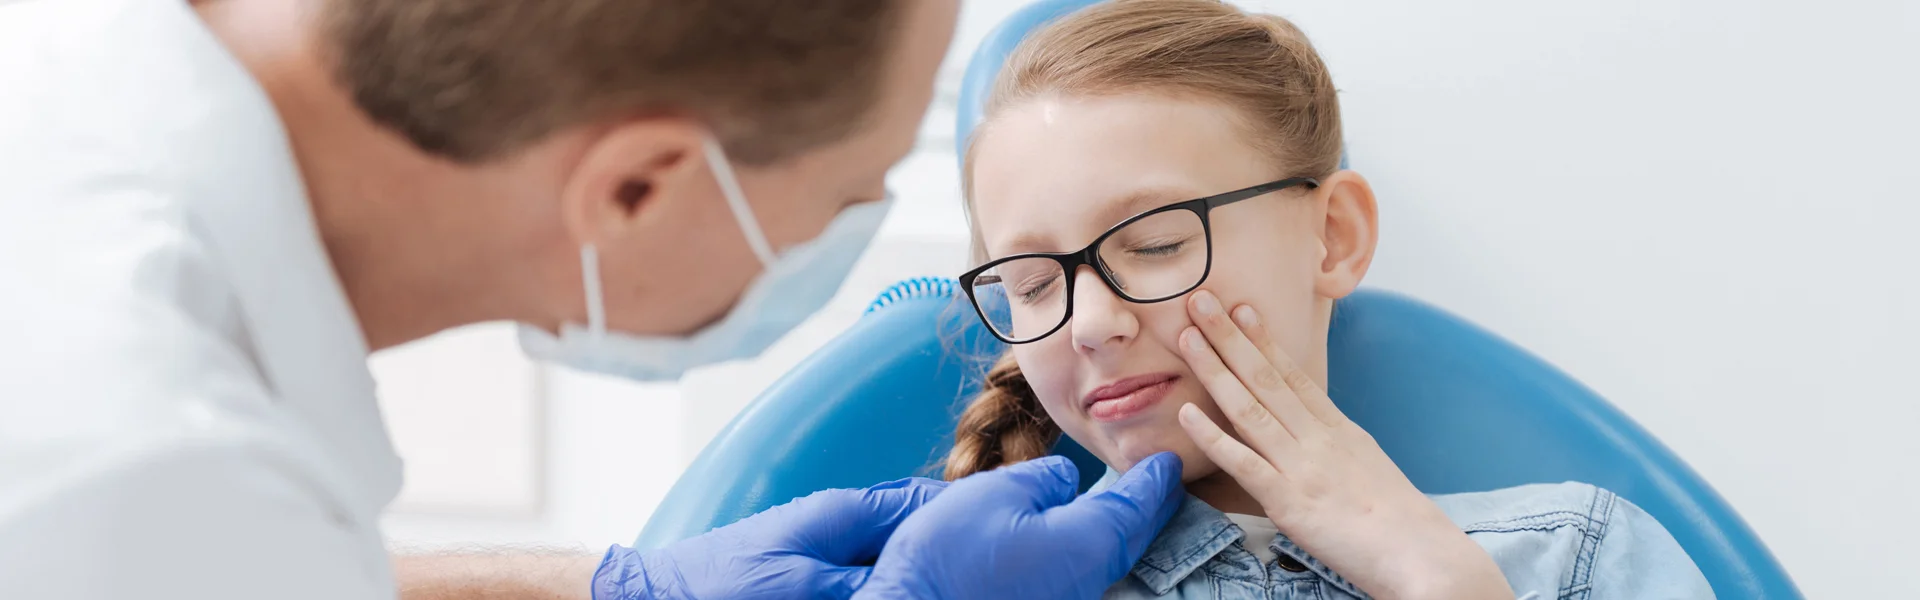 Quick and Effective Solutions for Emergency Dental Problems in Children